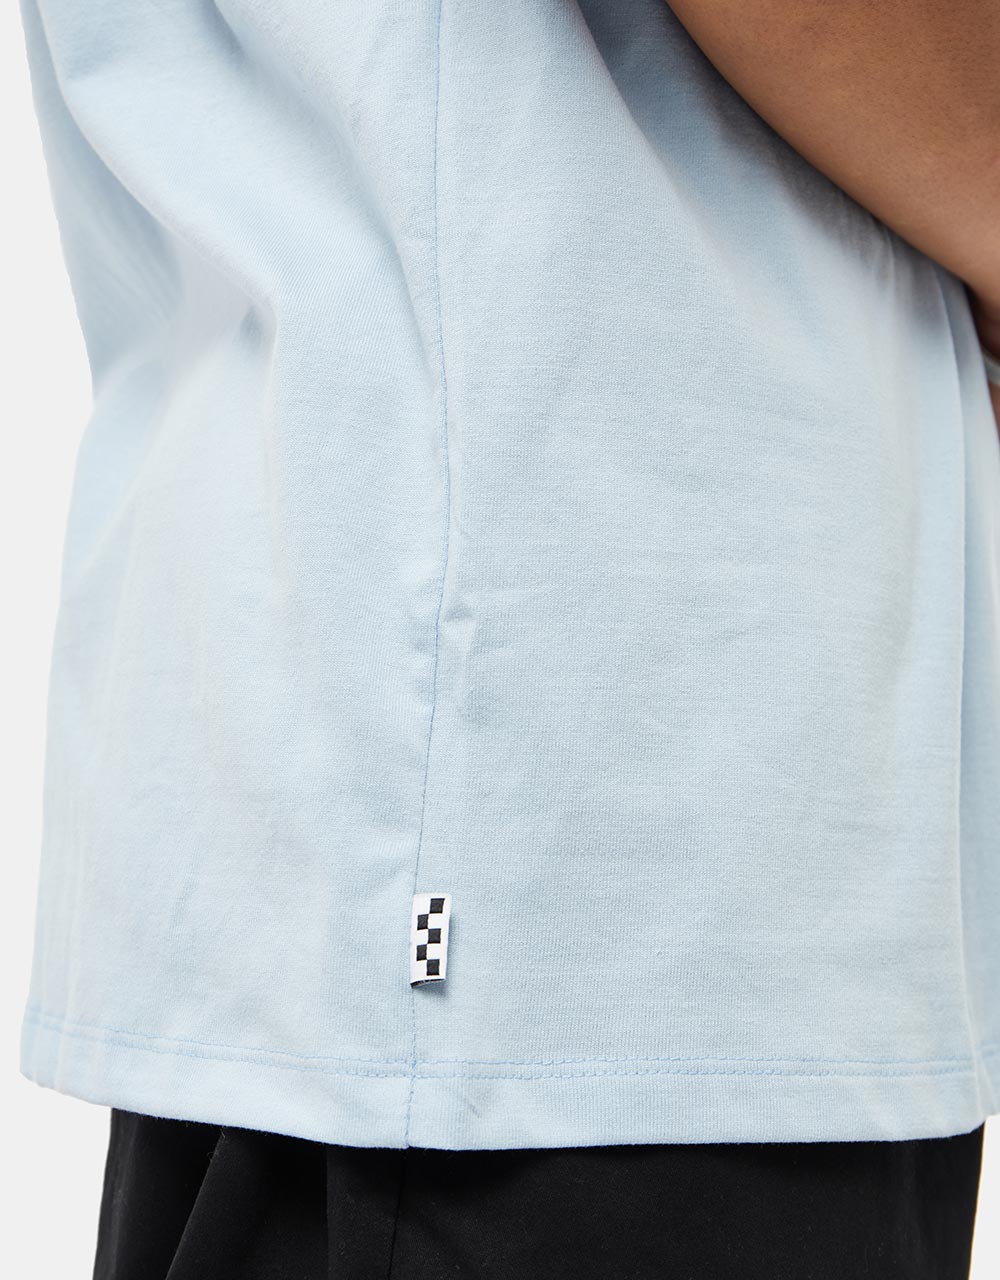 Vans Off The Wall Graphic Loose T-Shirt - Cashmere Blue